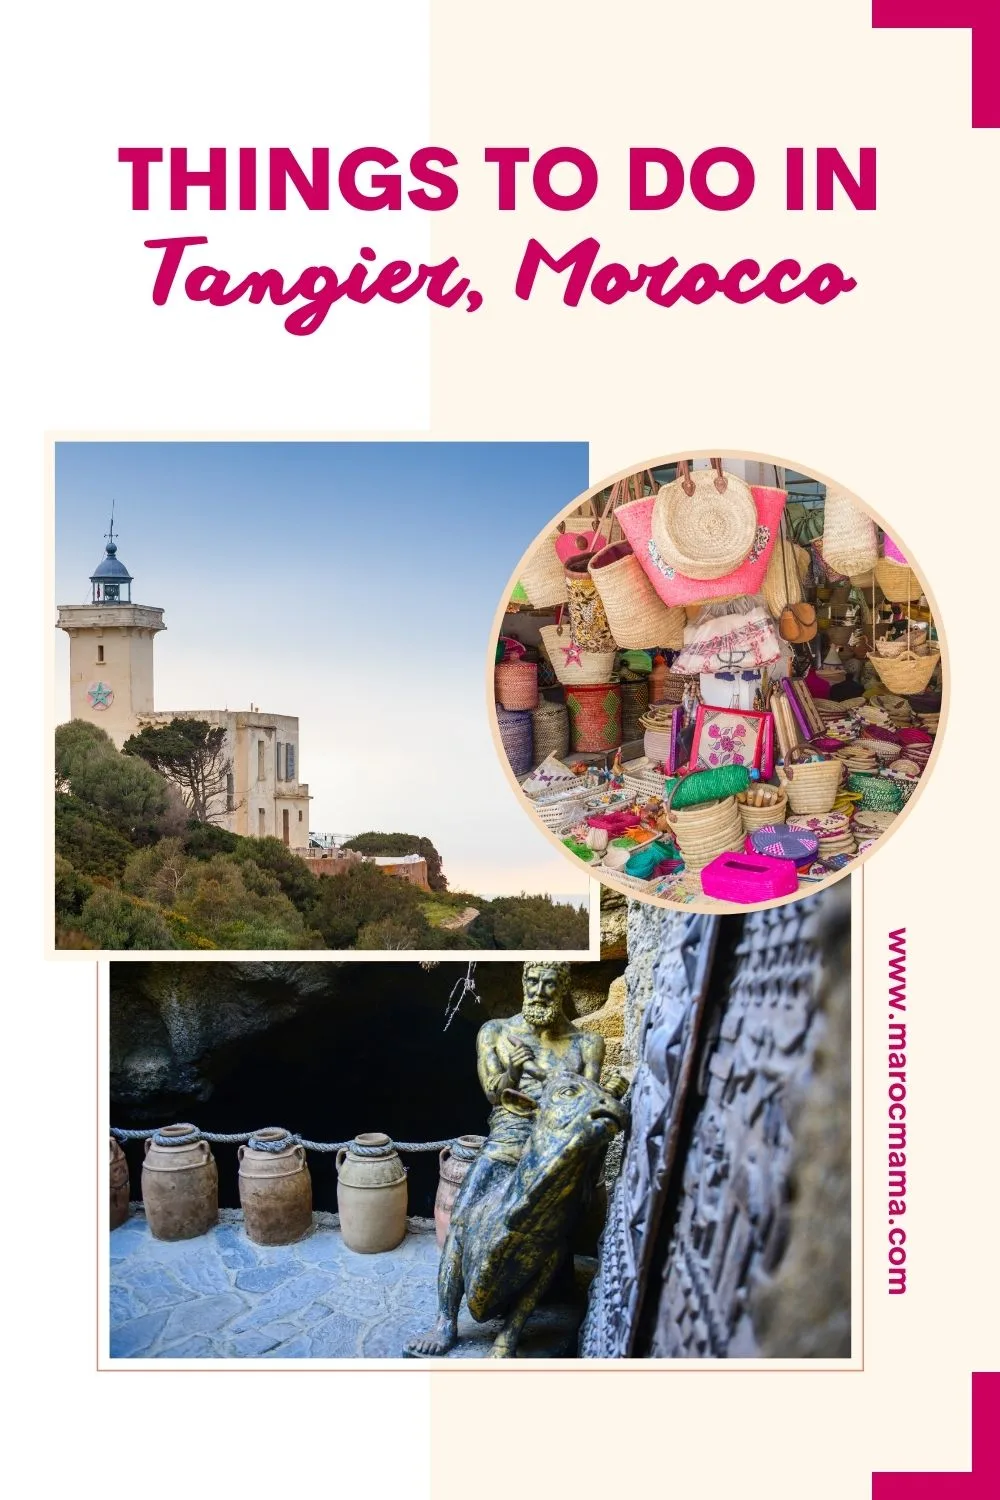 Lighthouse at Cape Malabata, colorful baskets and bags at Tangier Medina Souks and the Caves of Hercules with the text Things to Do in Tangier, Morocco